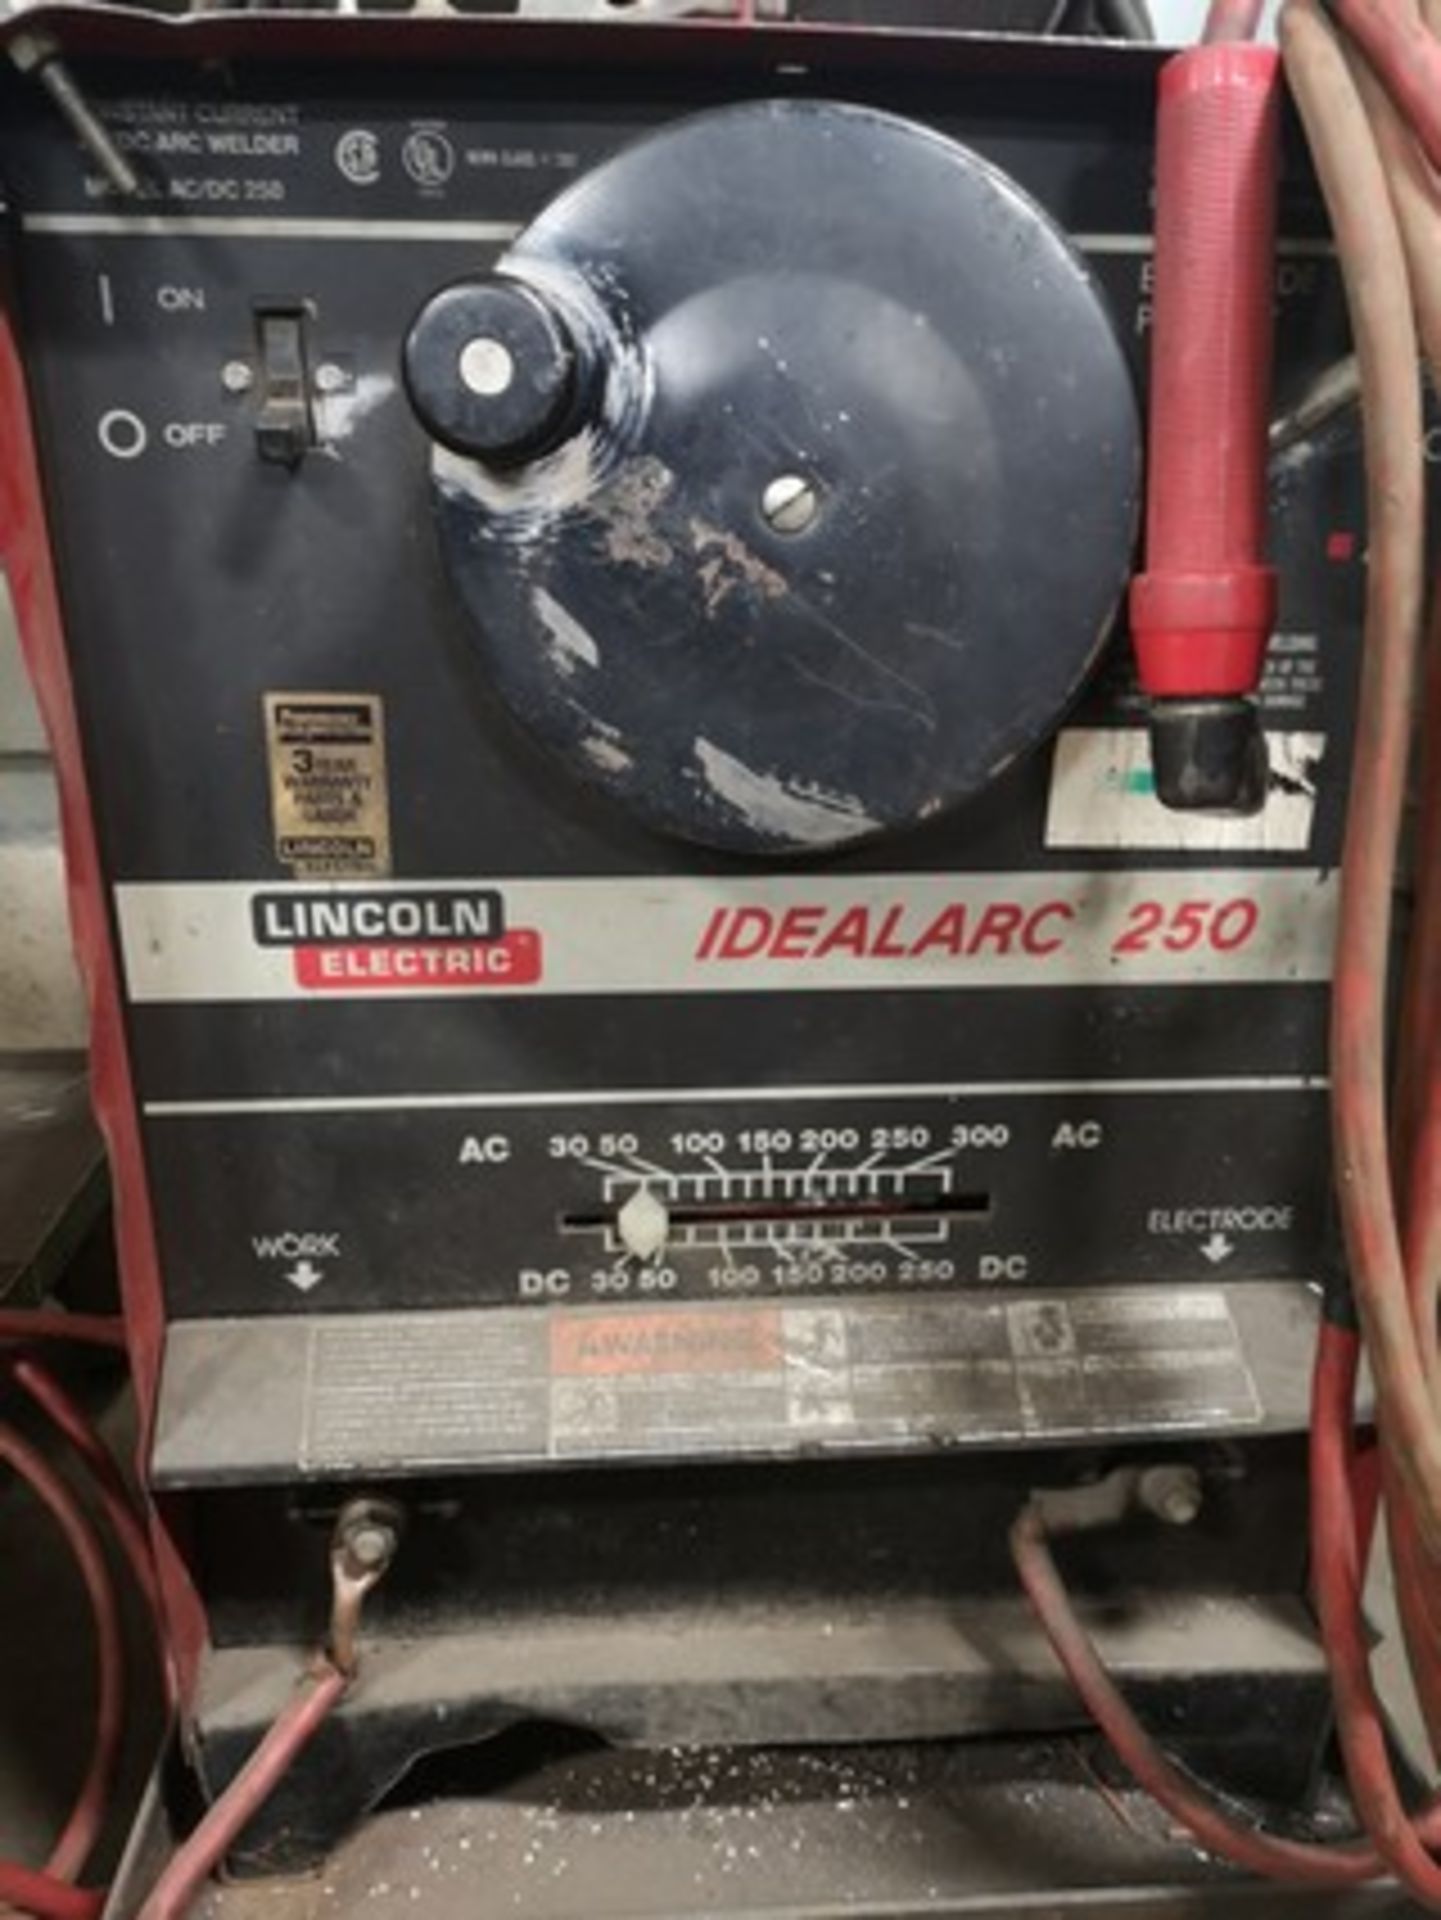 LINCOLN ELECTRIC IDEALARC 250 AC/DC ARC WELDER, S/N C1950300331 W/ WELDING MASK - Image 3 of 4